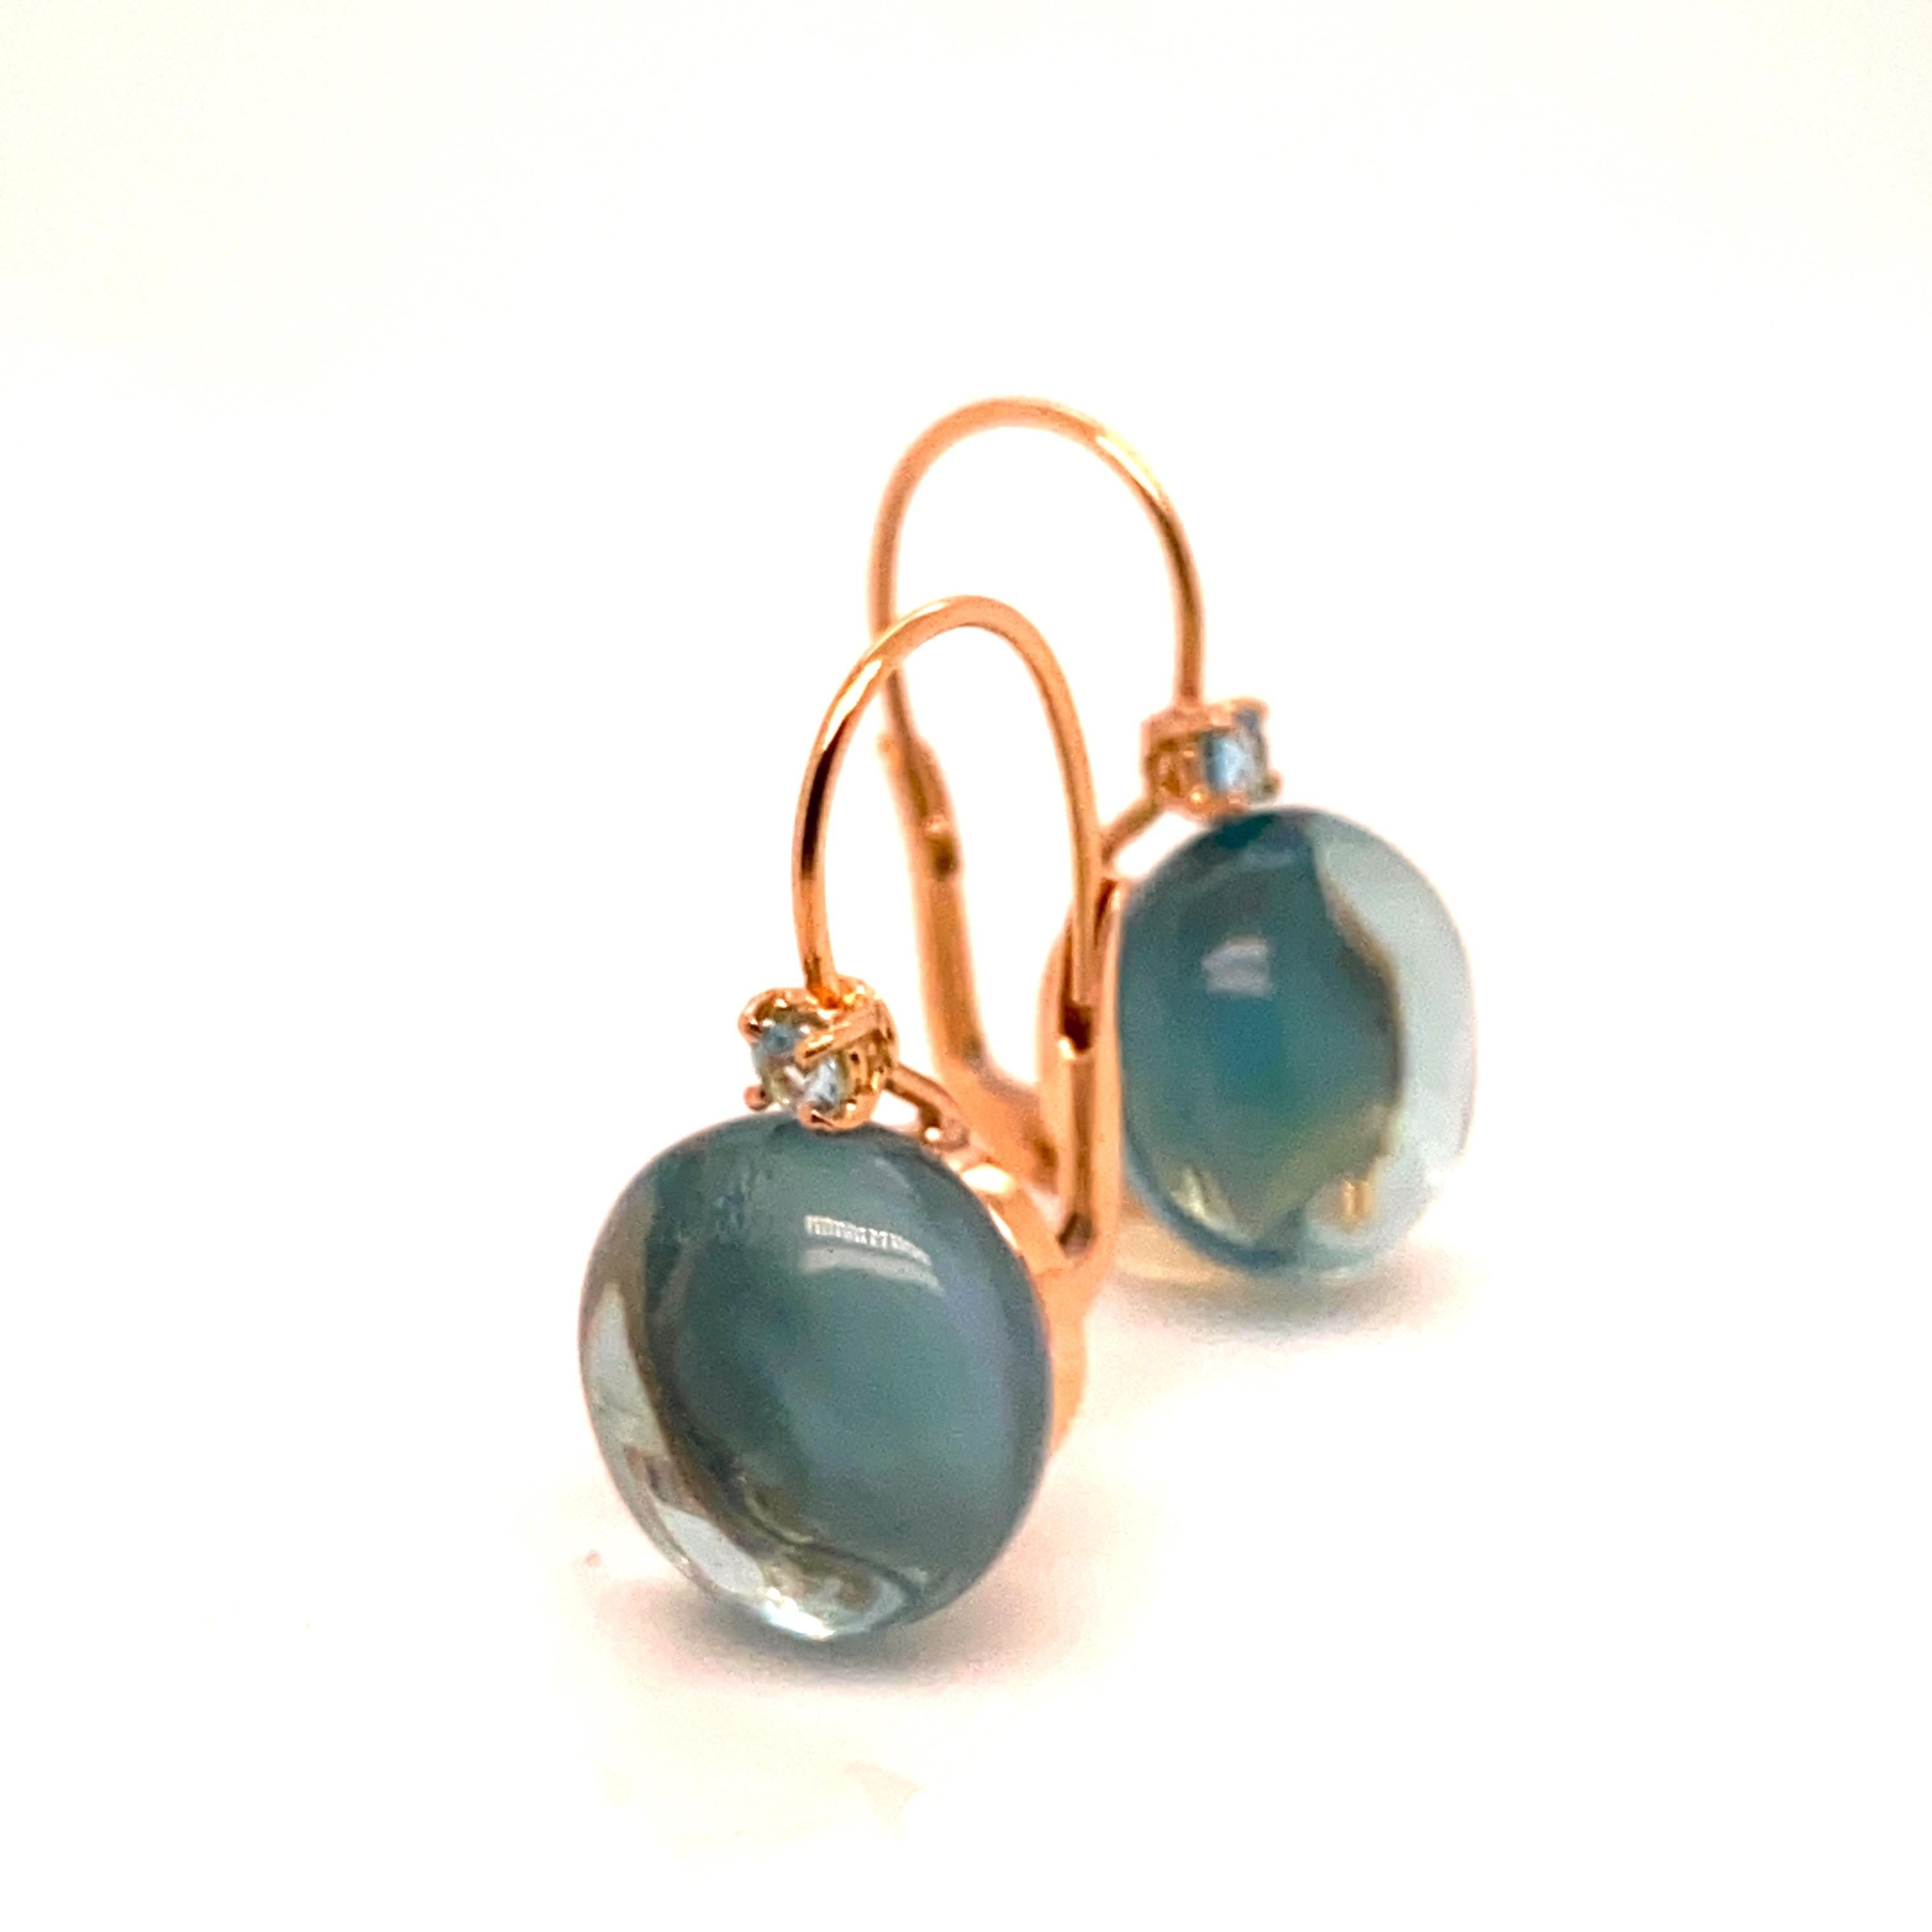 ear shuttles or earrings in the shape of candy or sleep with topazes cut in shapes of cabochons .overcommontees of 2 topazes cut and mounted on a rose gold frame 18 karat .
the closer is ergonomic and allows the pretty topazes to move freely under